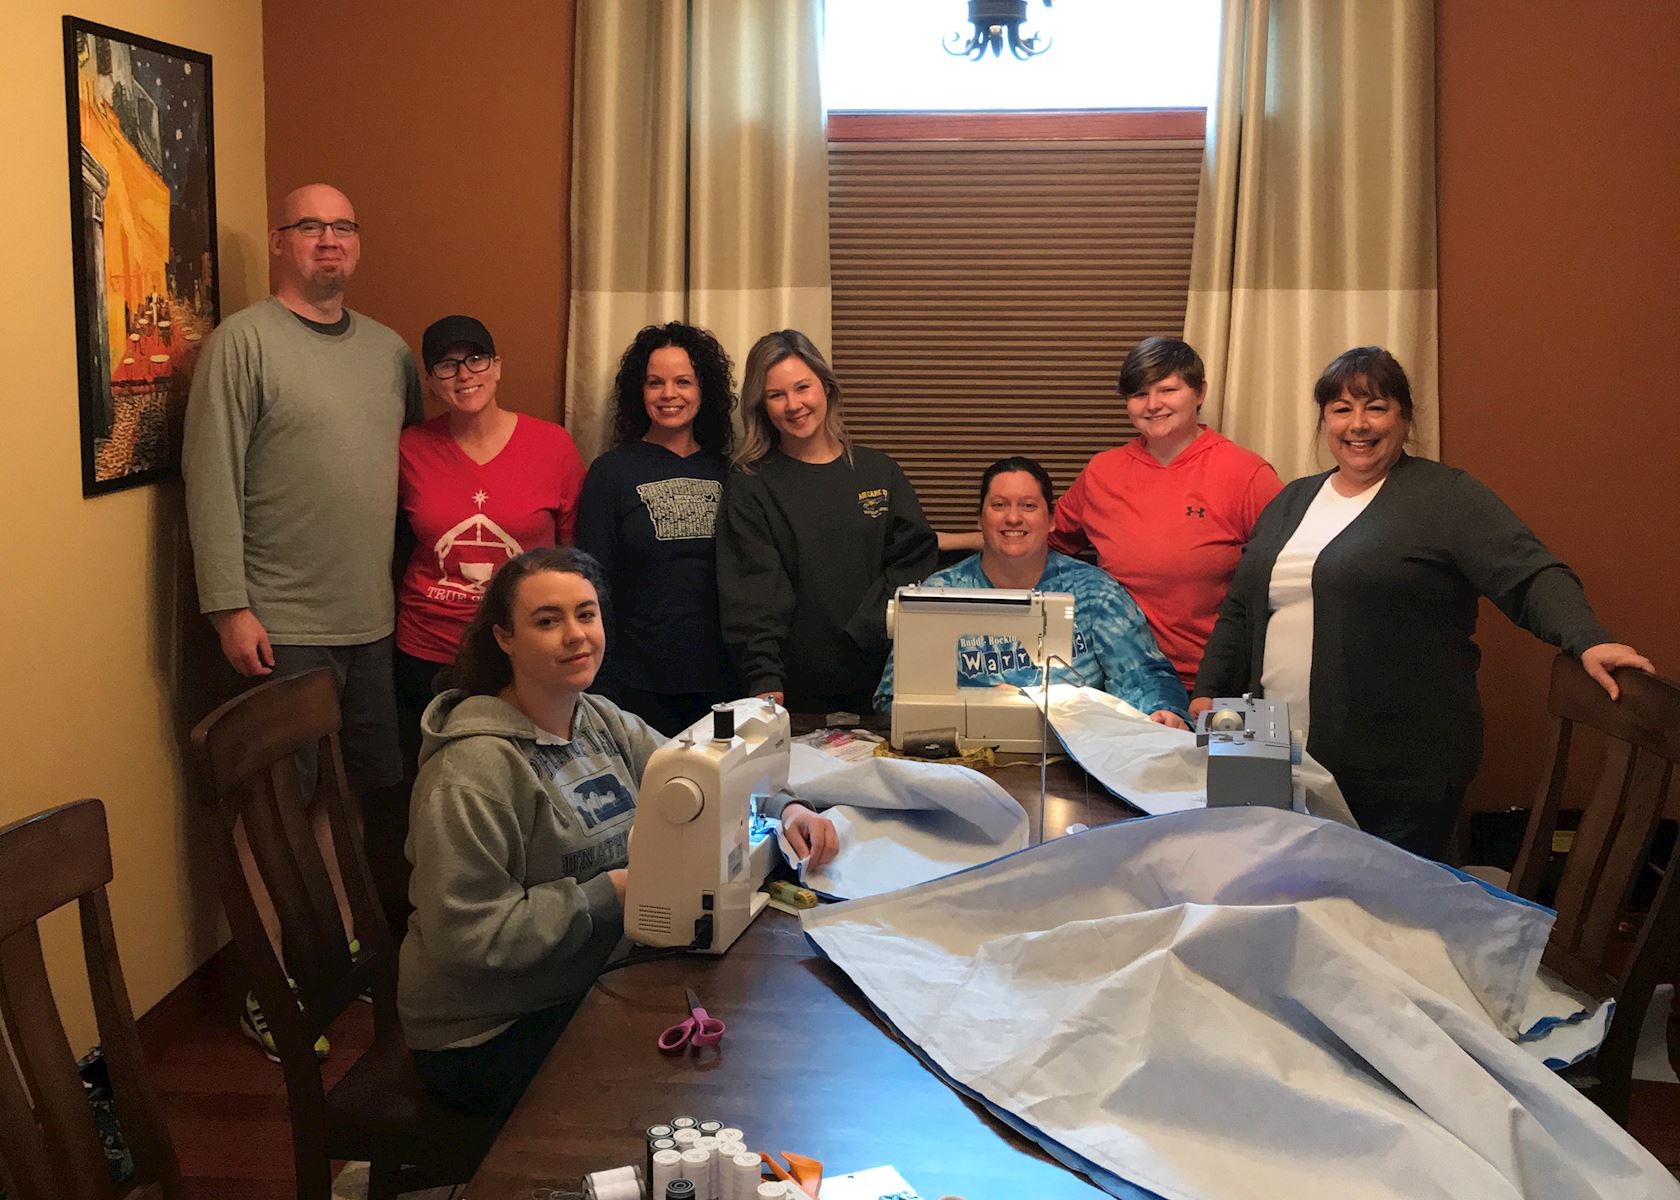 MercyOne team turns Hospital Materials into Sleeping Bags for Homeless